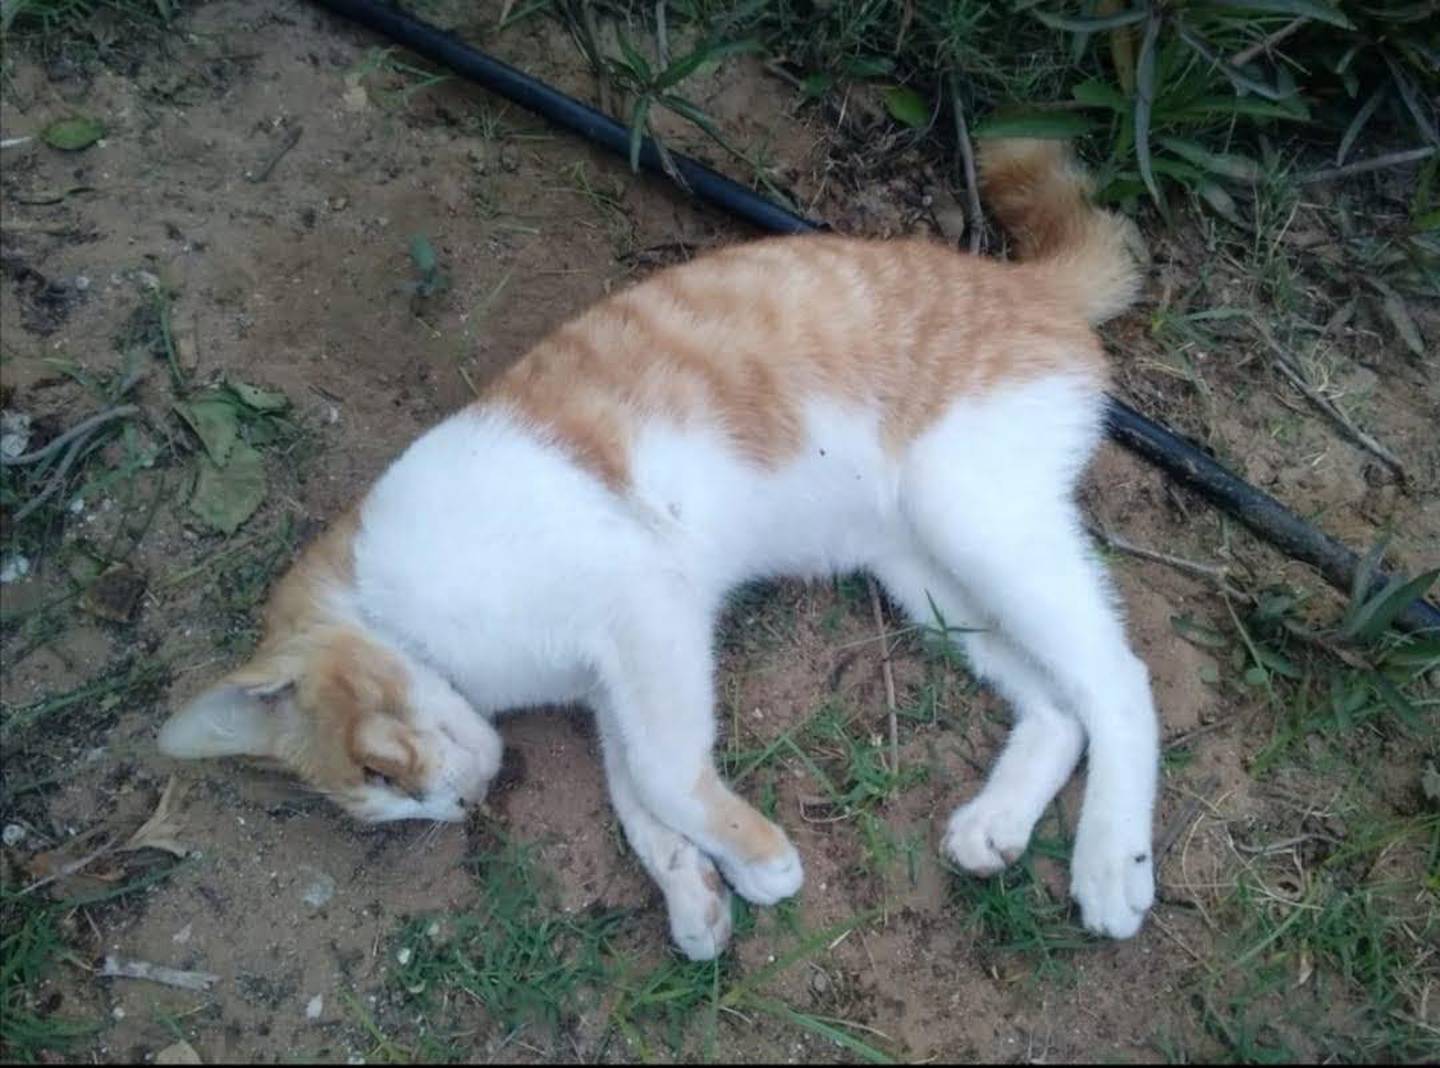 The cat, which died from its injuries, was discovered in a bush on the Corniche in Abu Dhabi. Courtesy David Ashwin